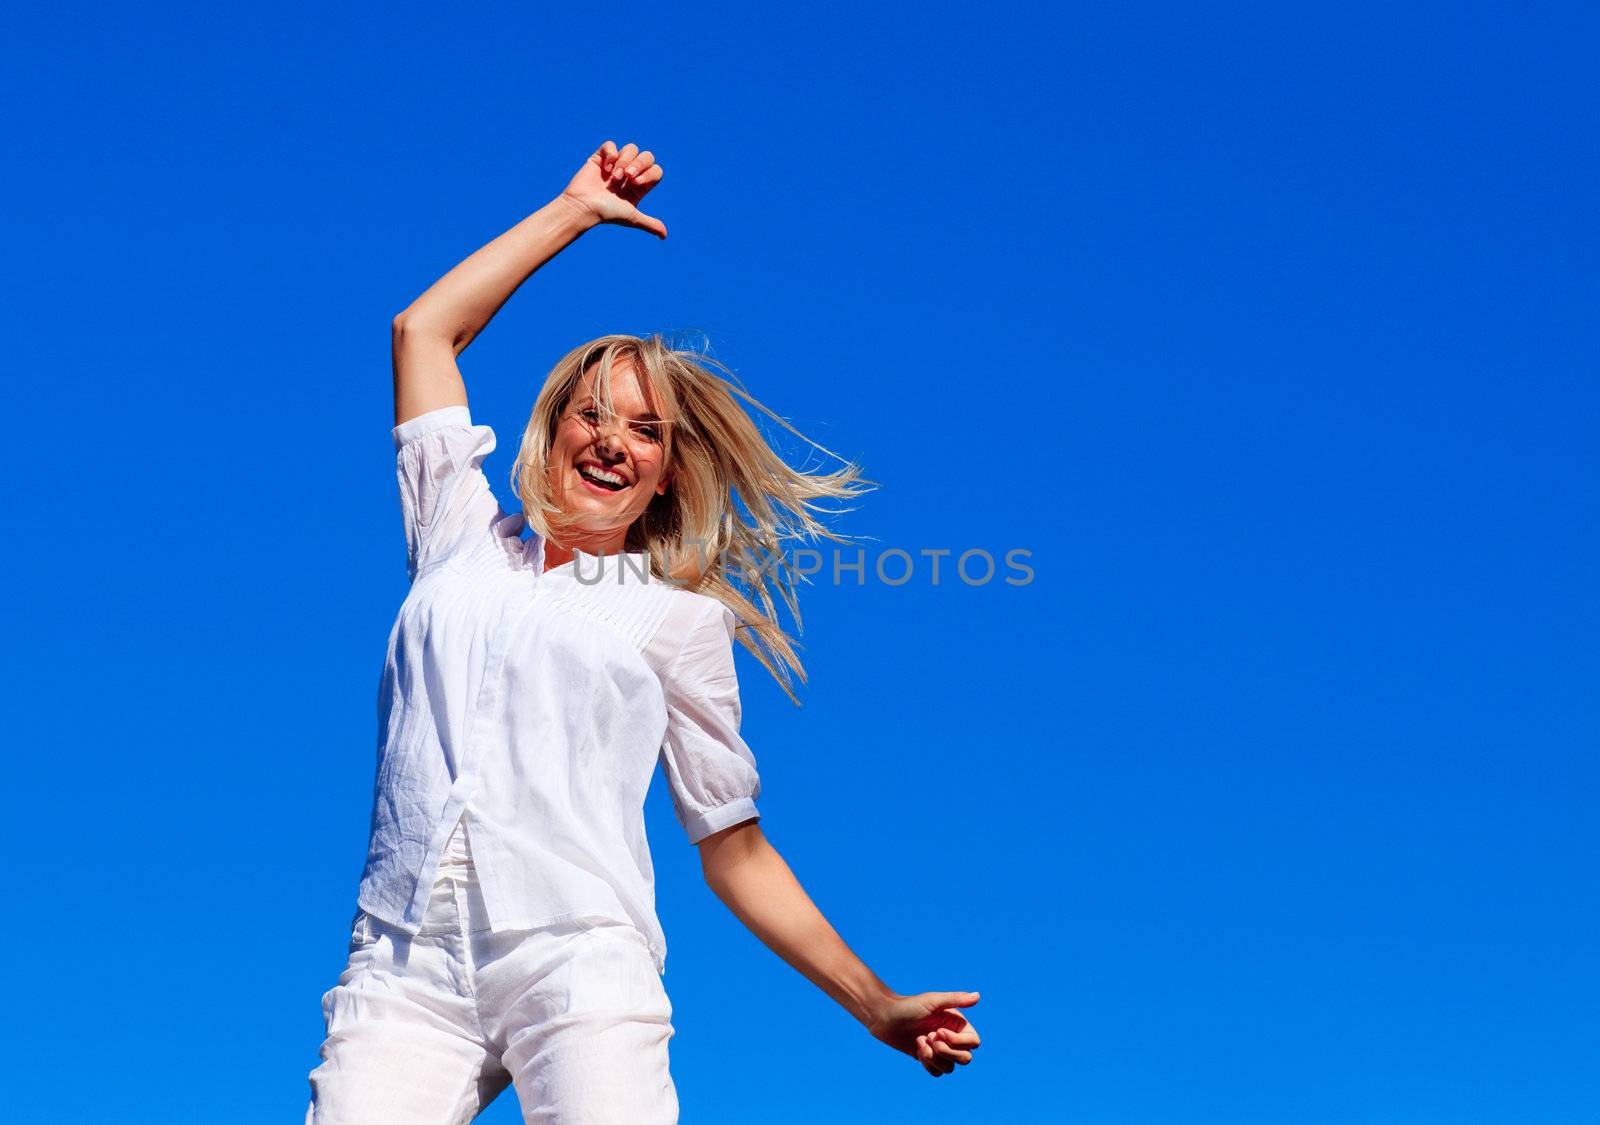 Smiling woman jumping against blue sky by Wavebreakmedia